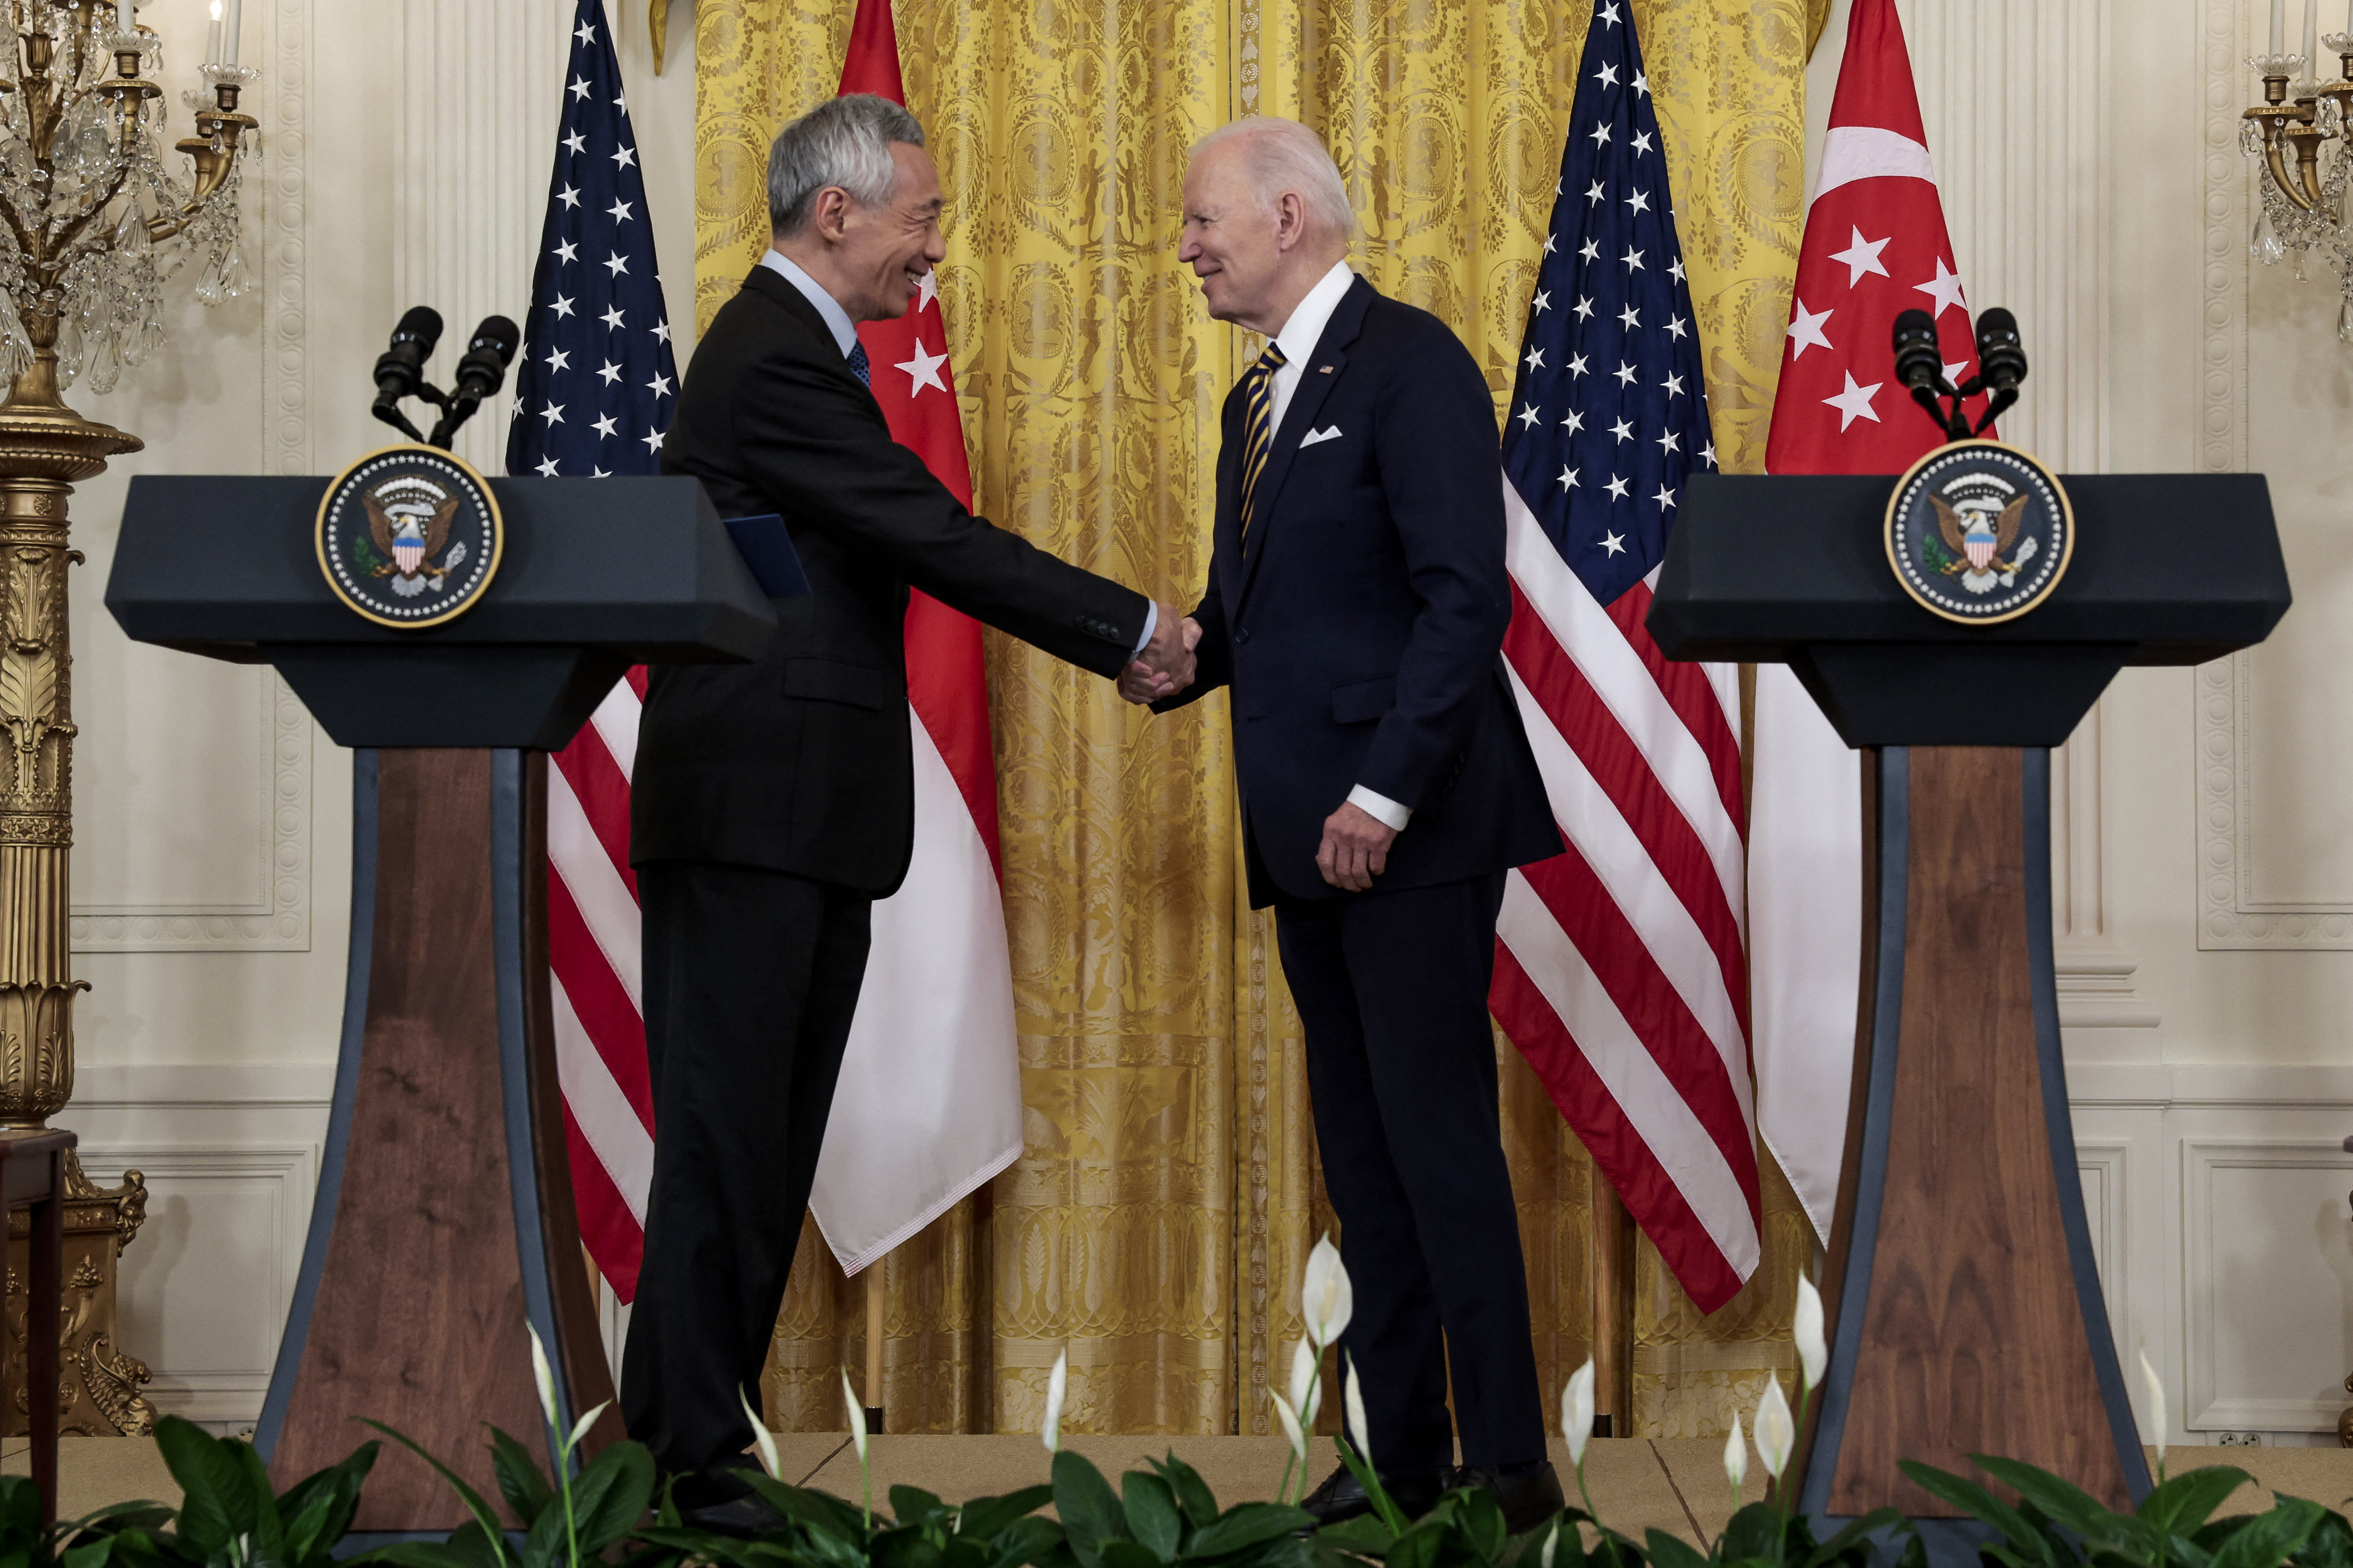 US President Joe Biden (right) at a joint news conference with Singapore’s Prime Minister Lee Hsien Loong (left) in the East Room at the White House in Washington, US, on March 29, 2022.